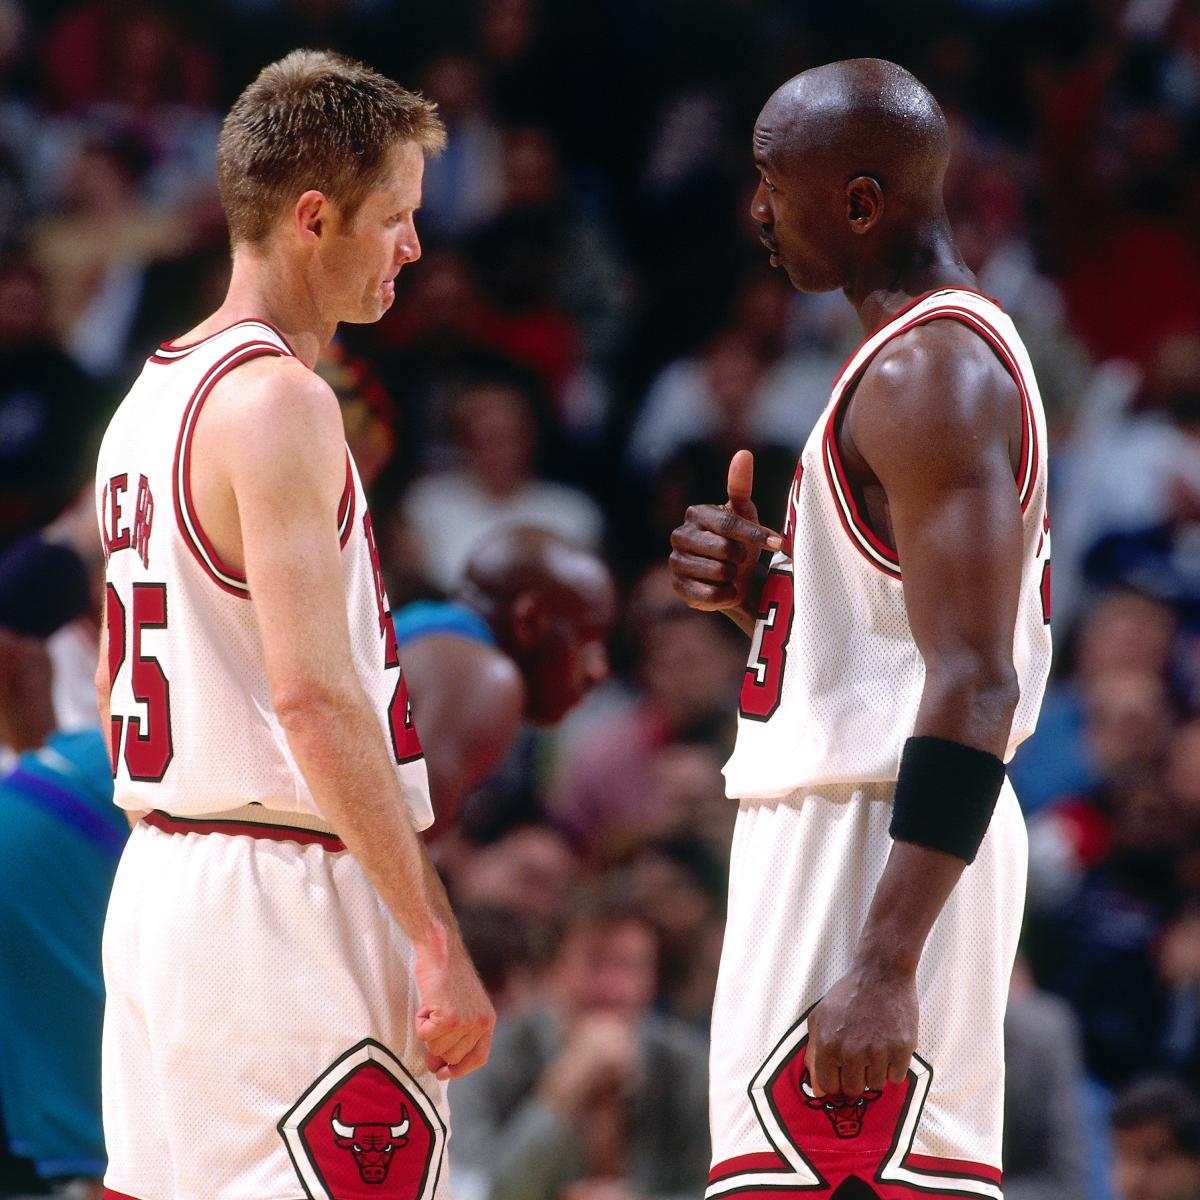 The Last Dance': Steve Kerr's shorts from 1997 NBA Finals up for auction -  Deseret News